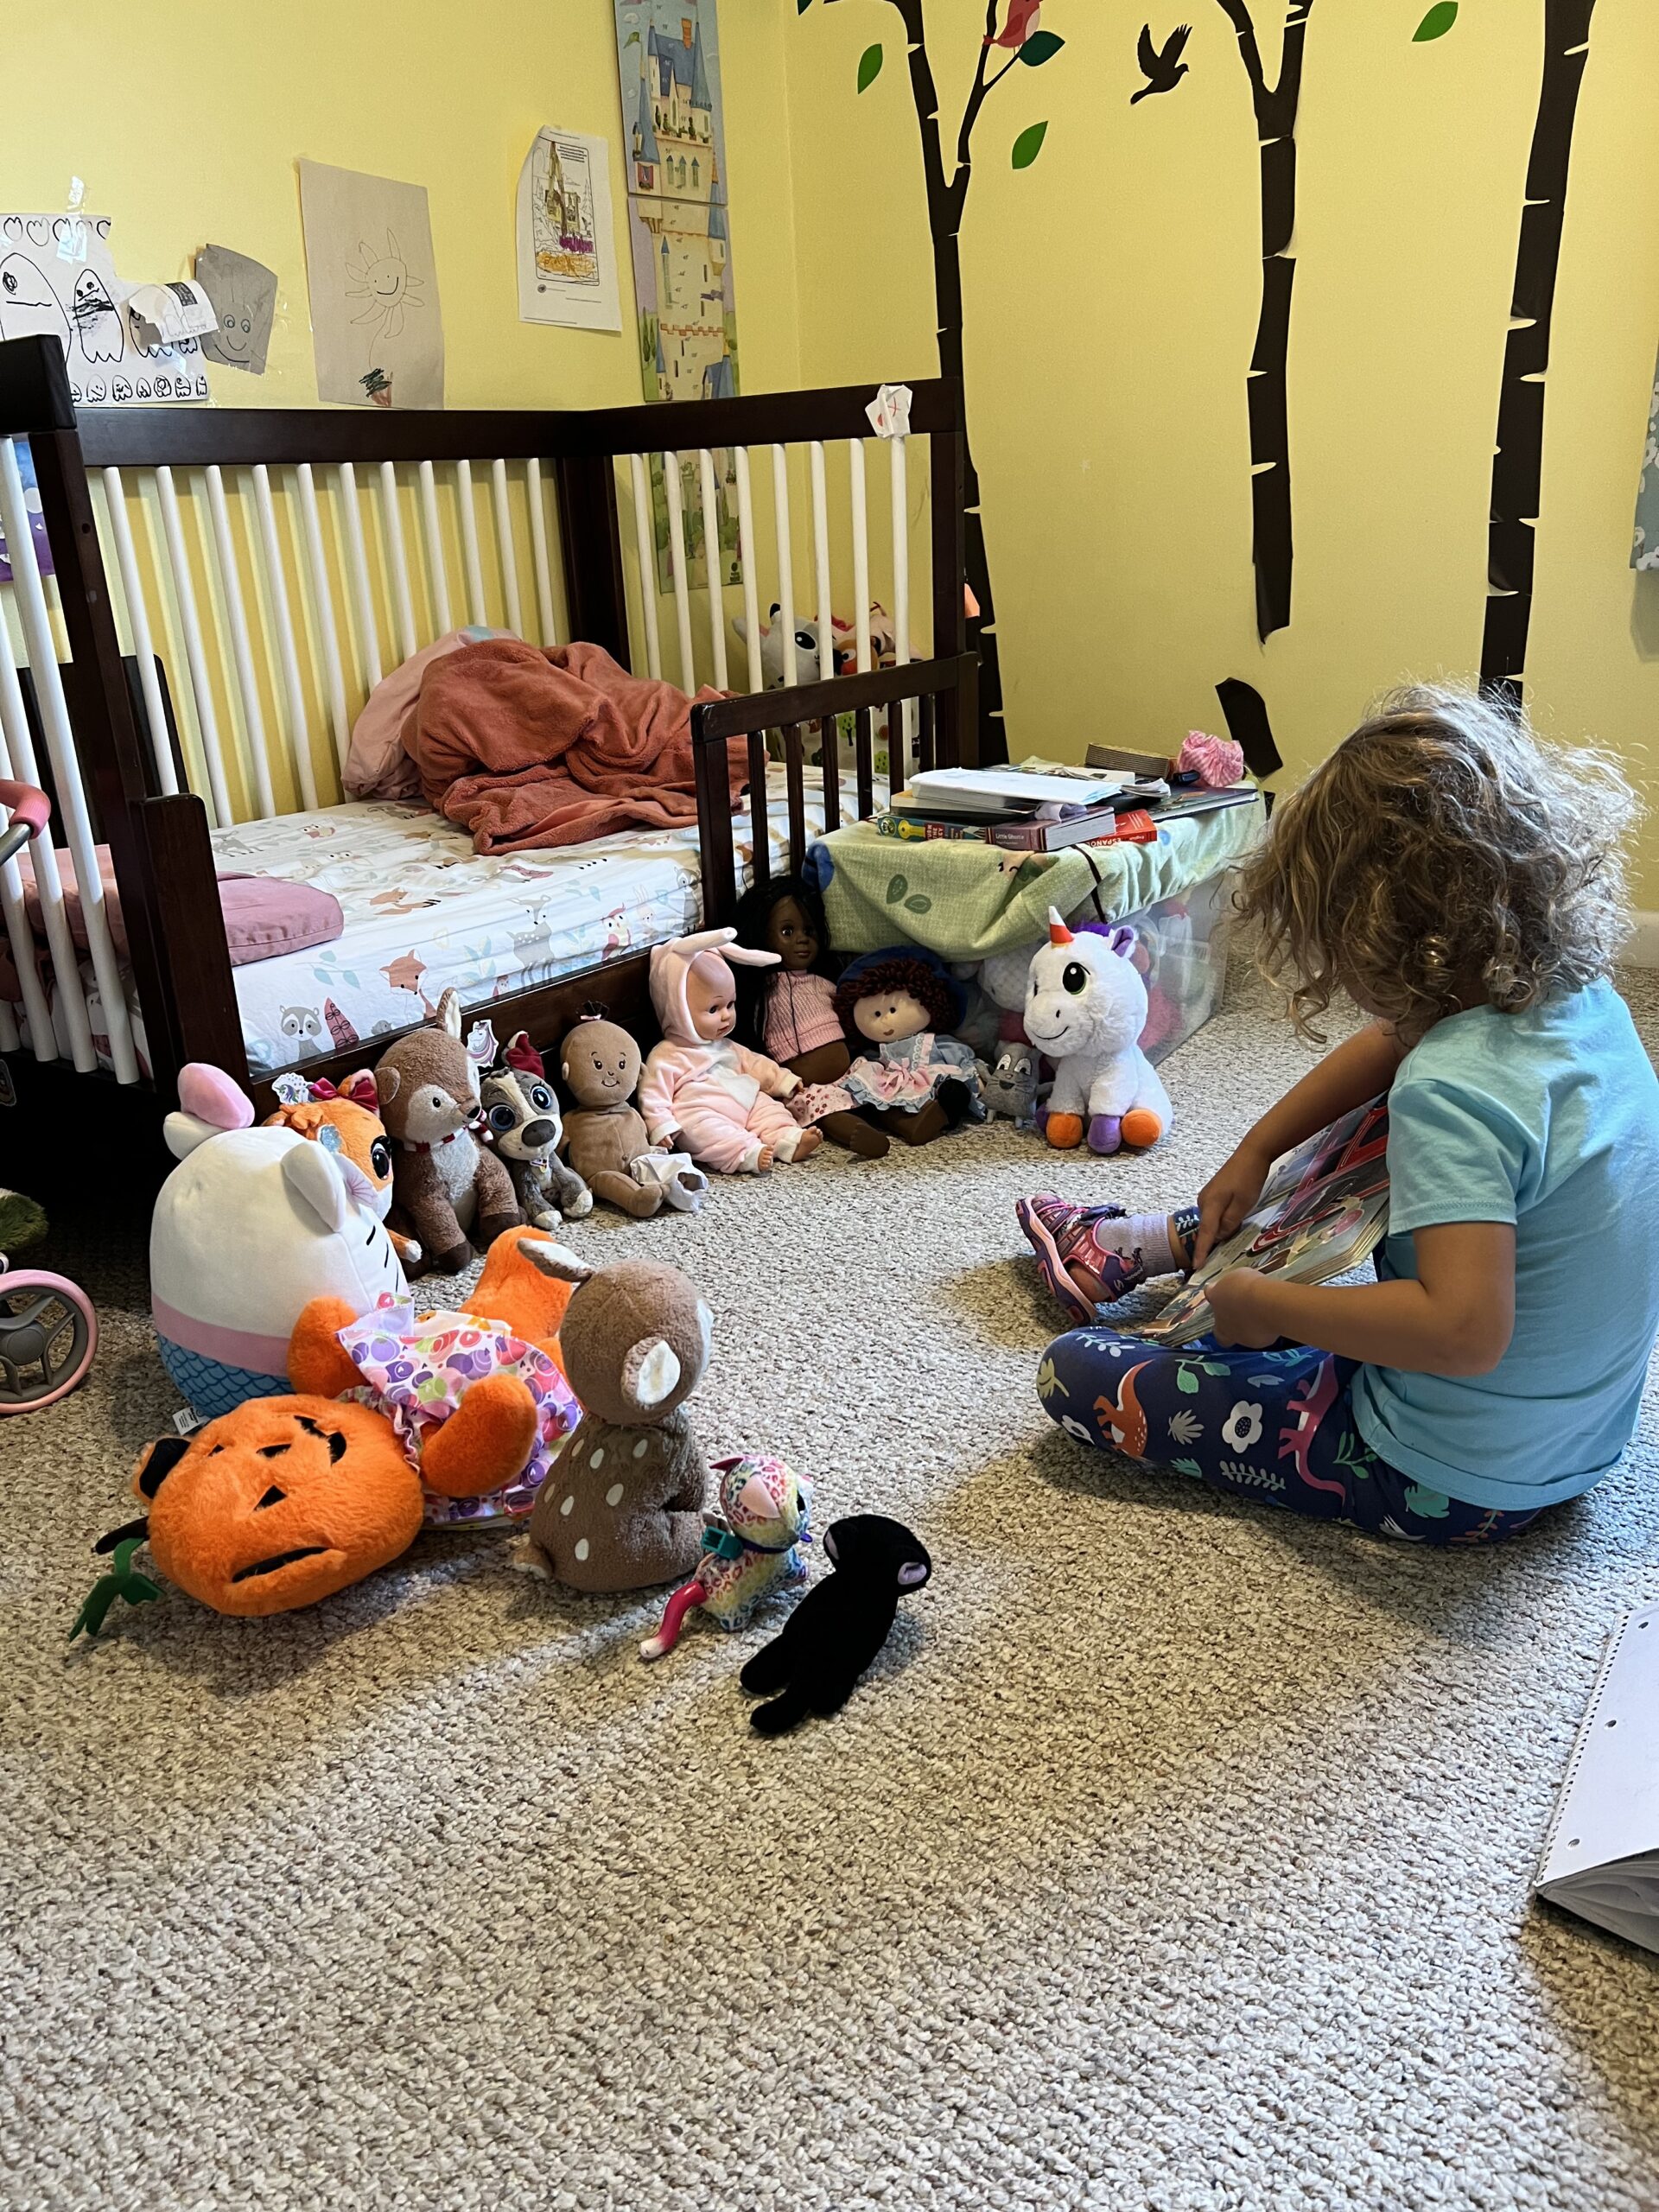 Marian reading to her stuffed animals, the kids are all right